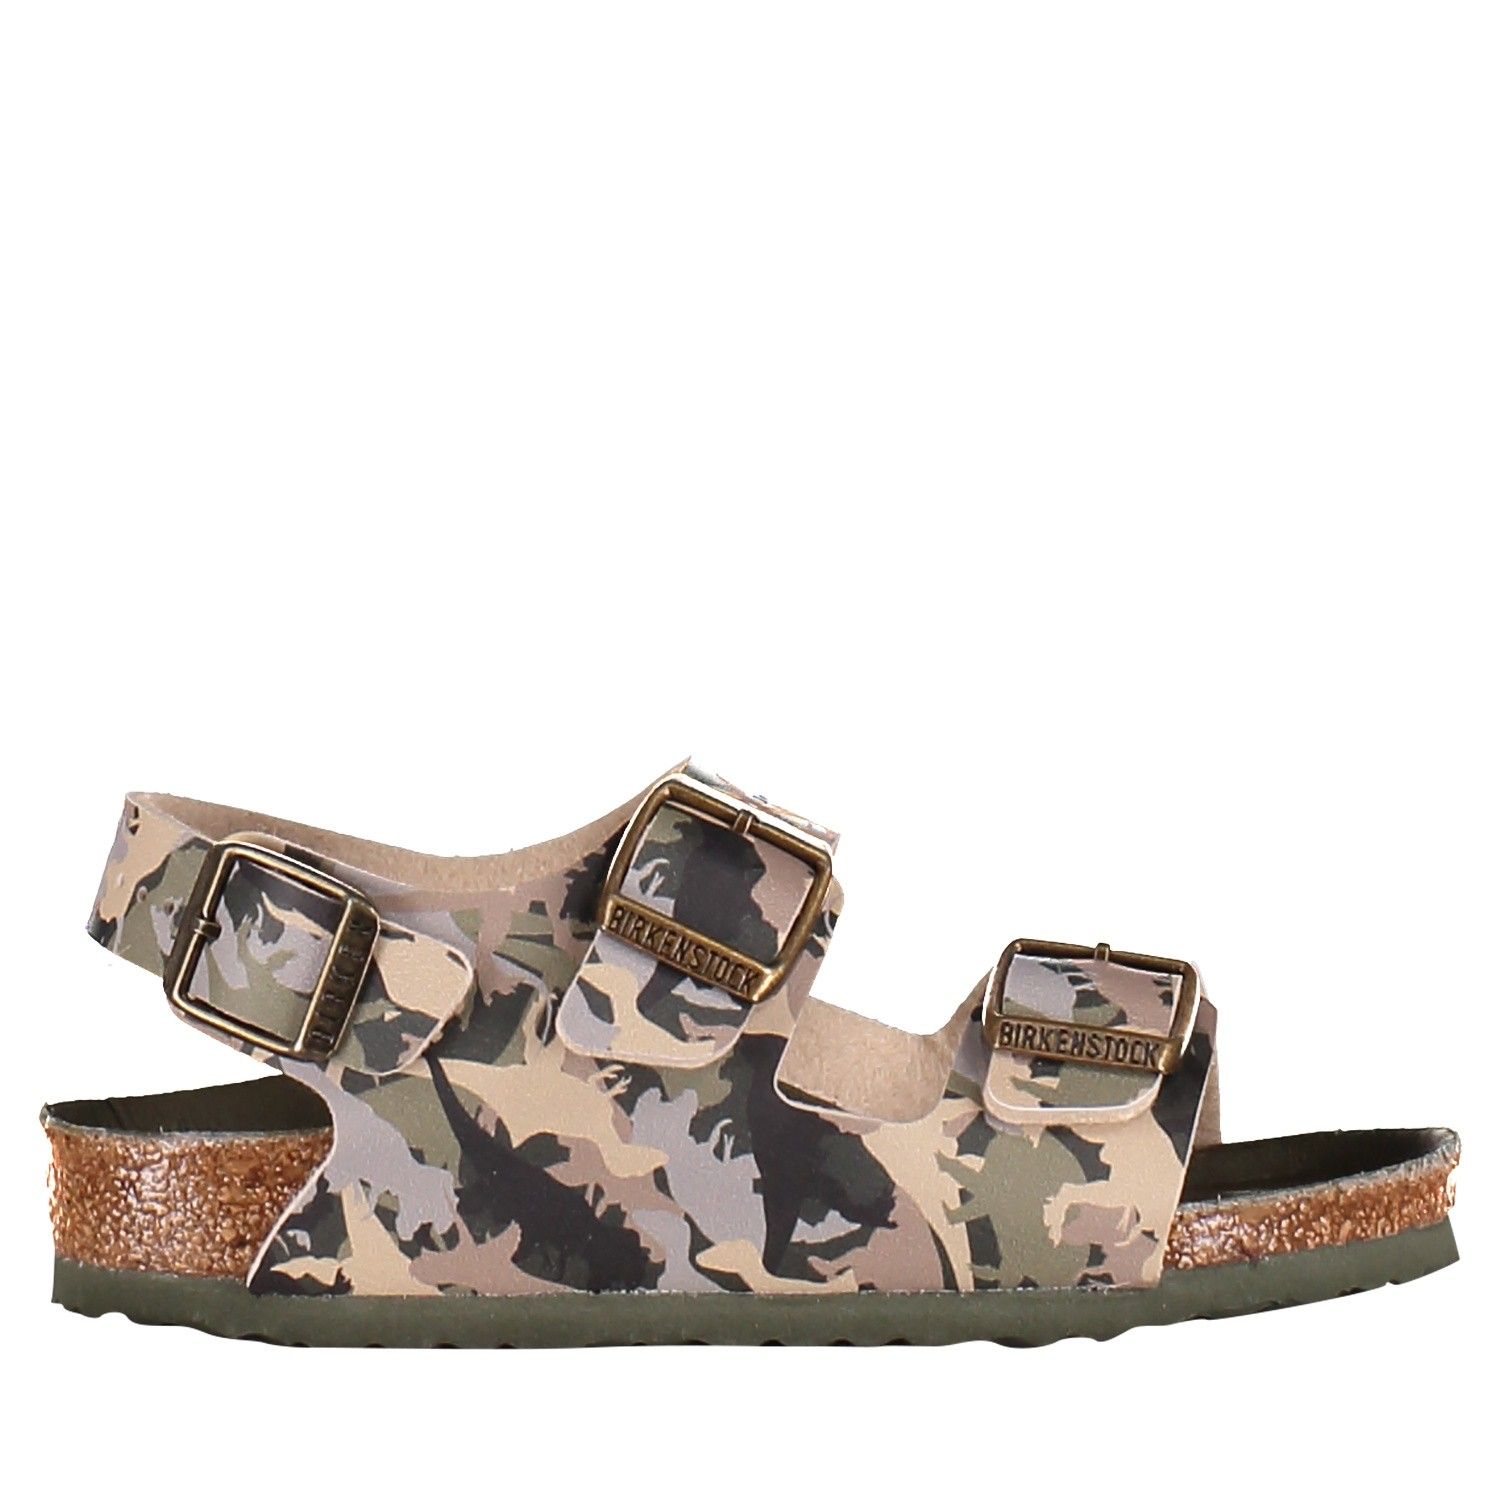 Birkenstock 101270 Boys Army at Coccinelle